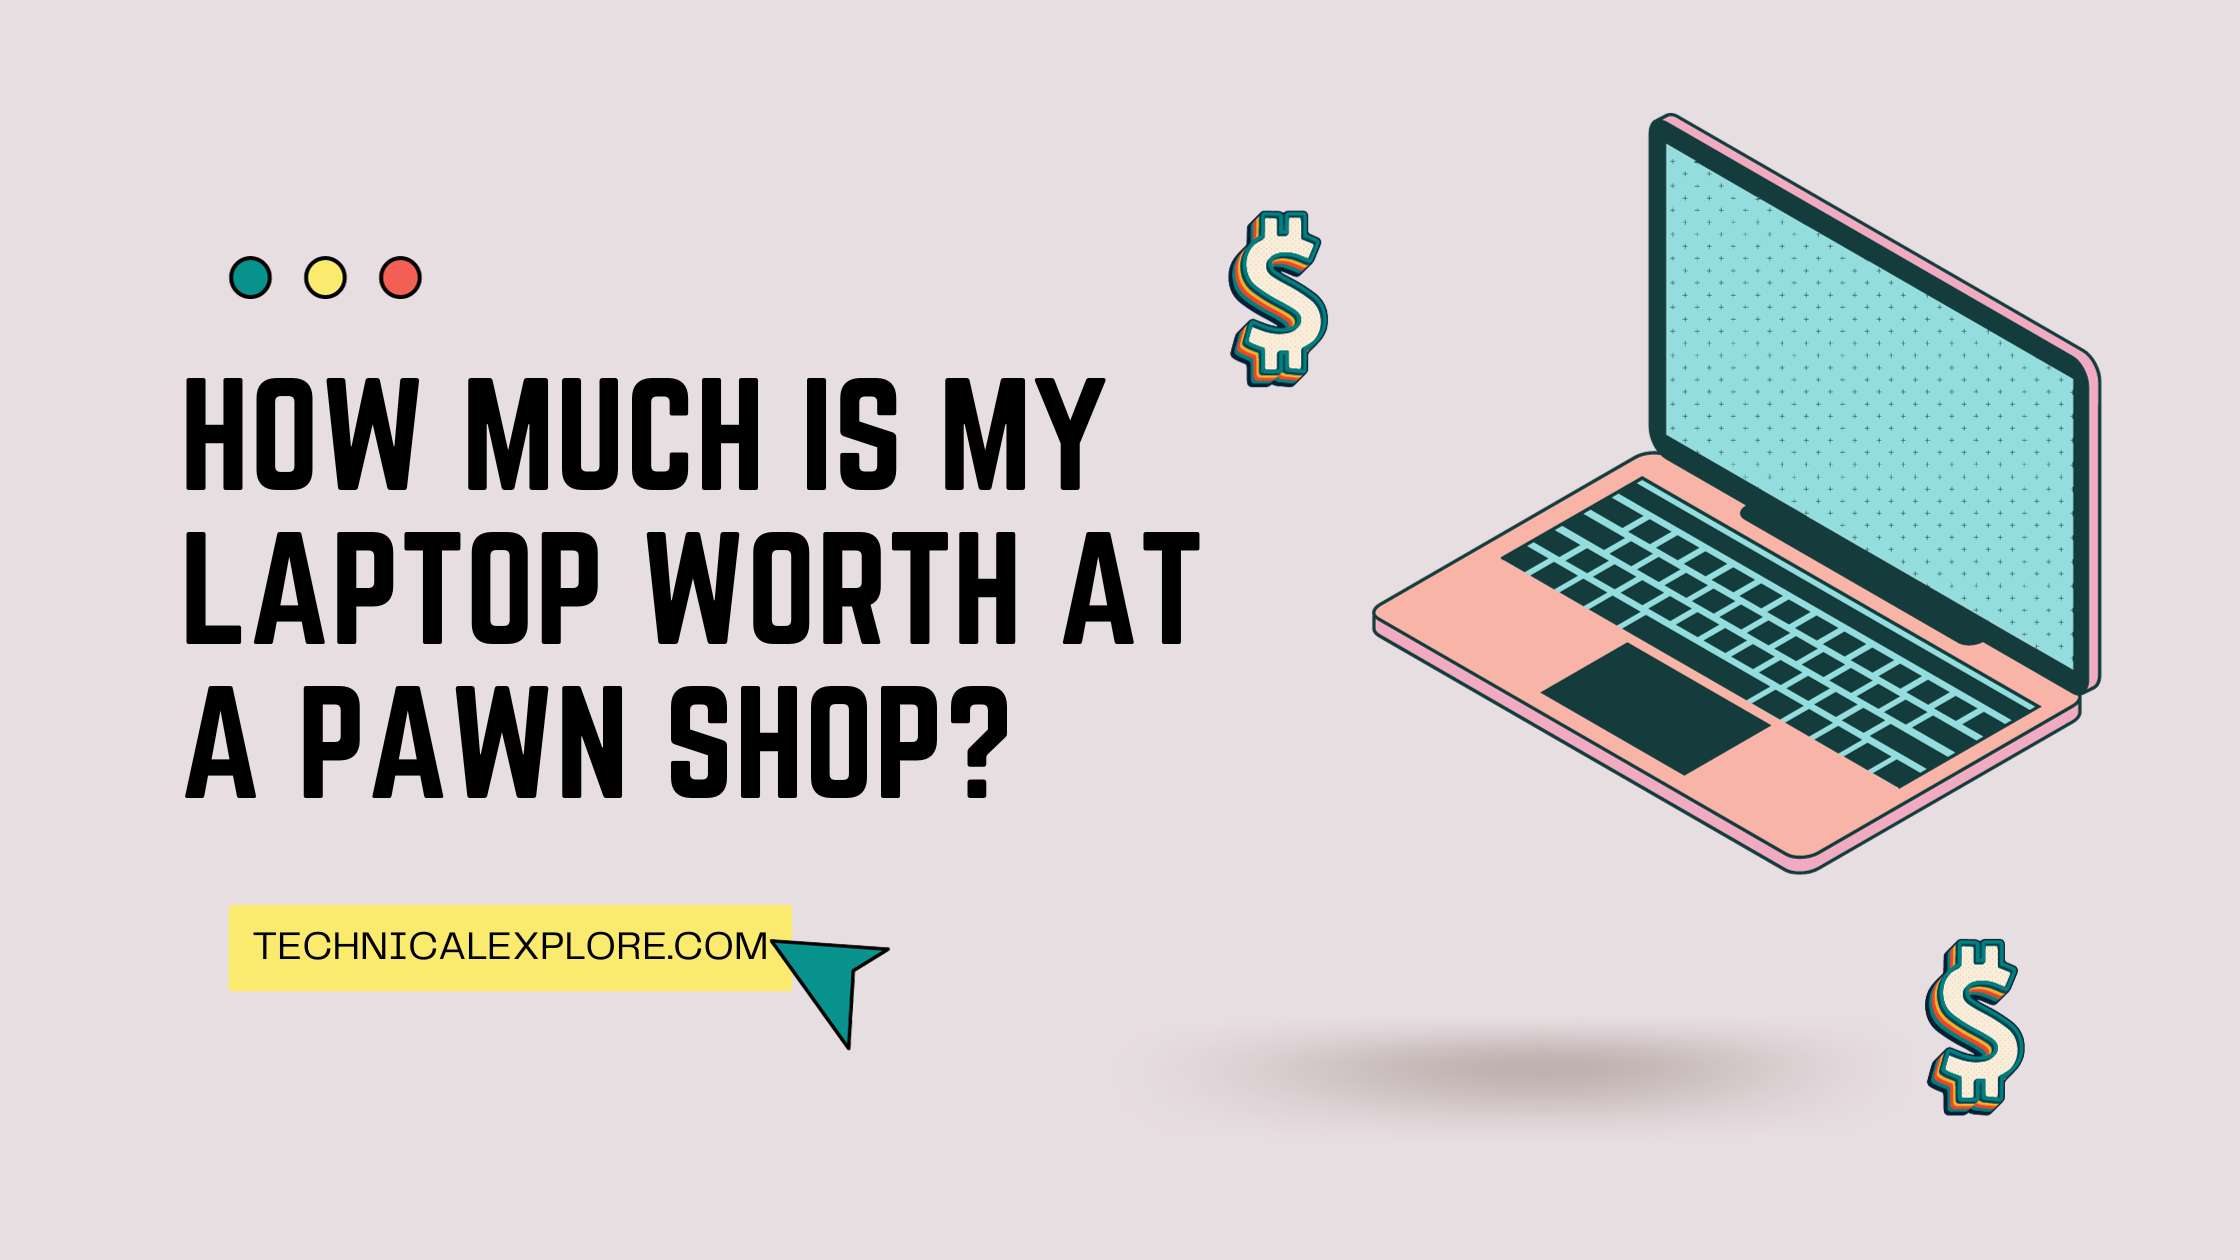 How Much Is My Laptop Worth at a Pawn Shop in 2023